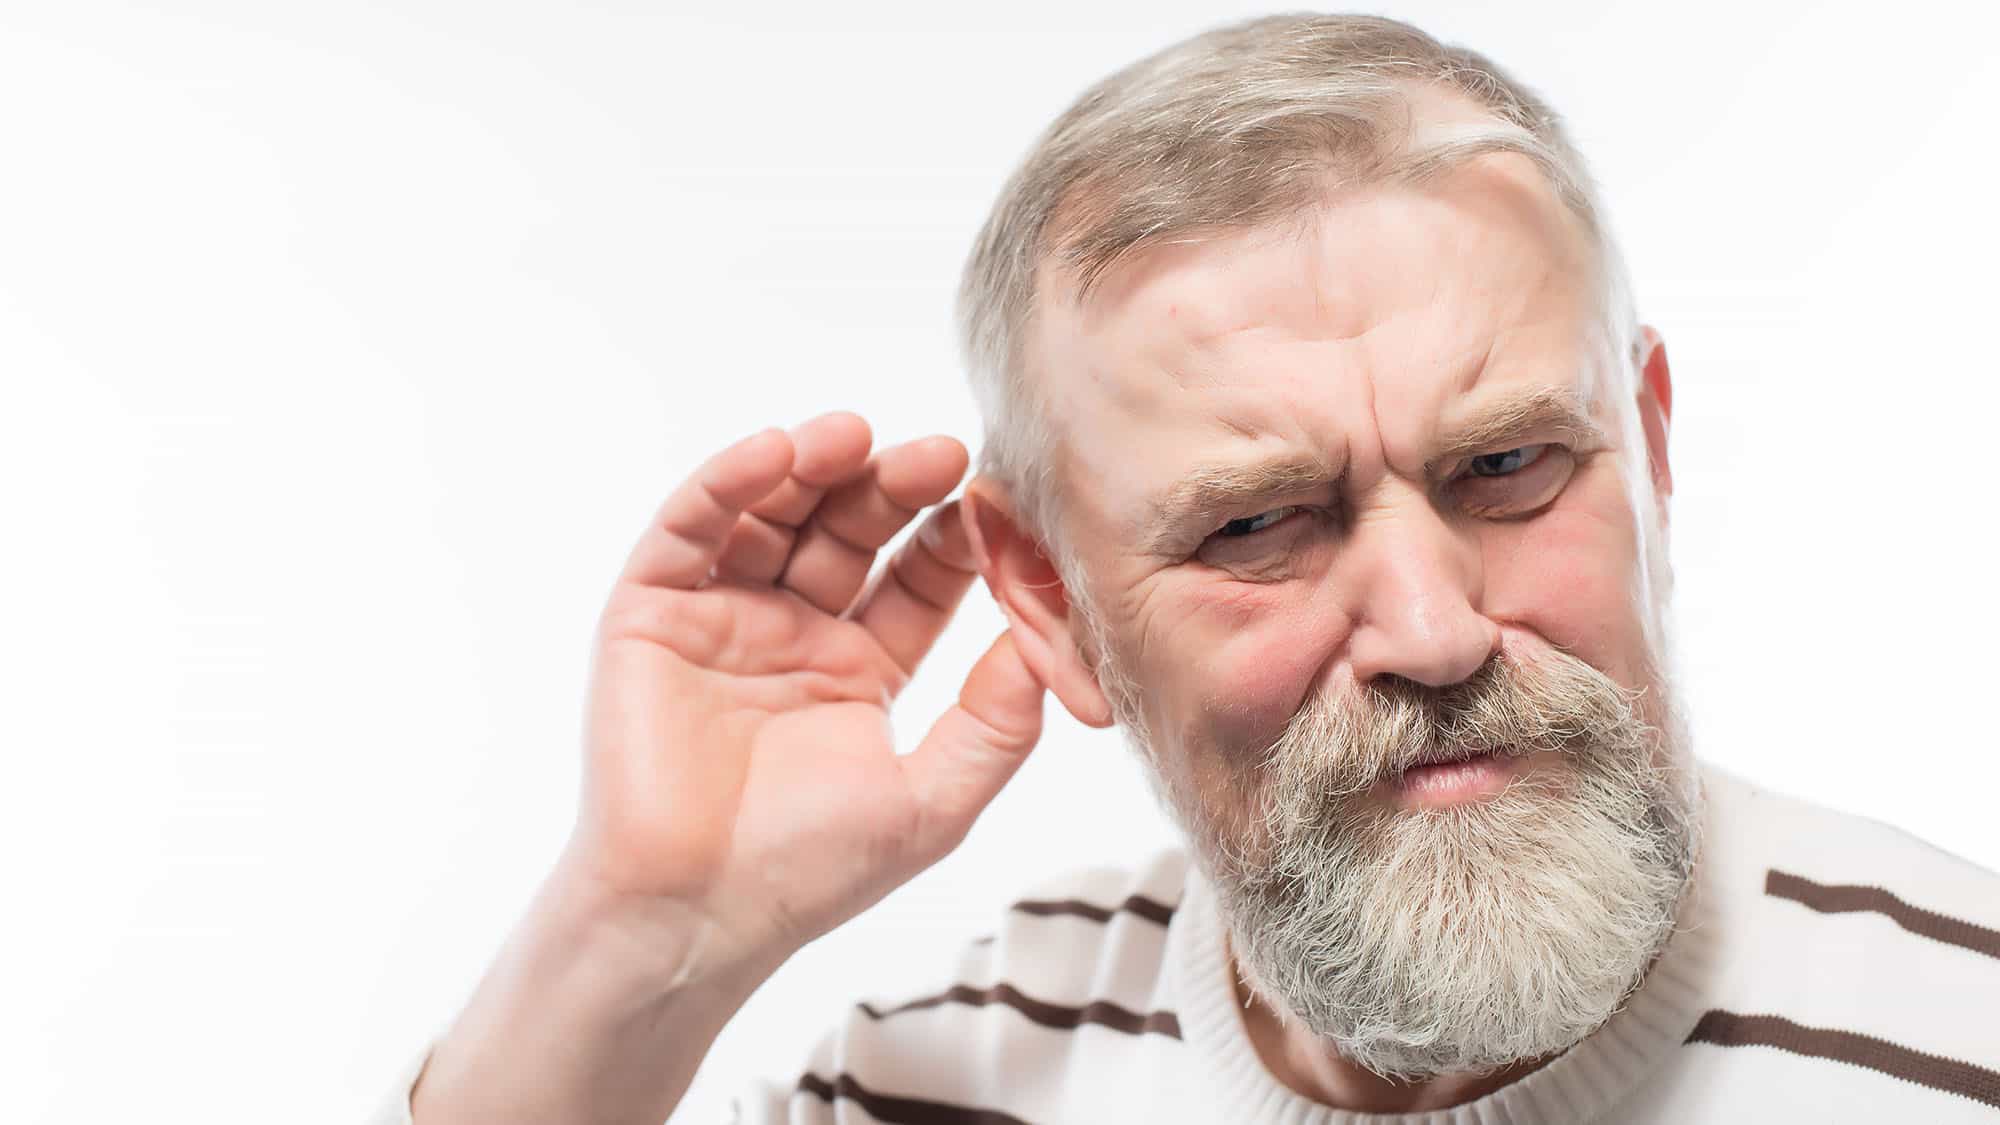 5 Activities to improve hearing problems and keep ears healthy